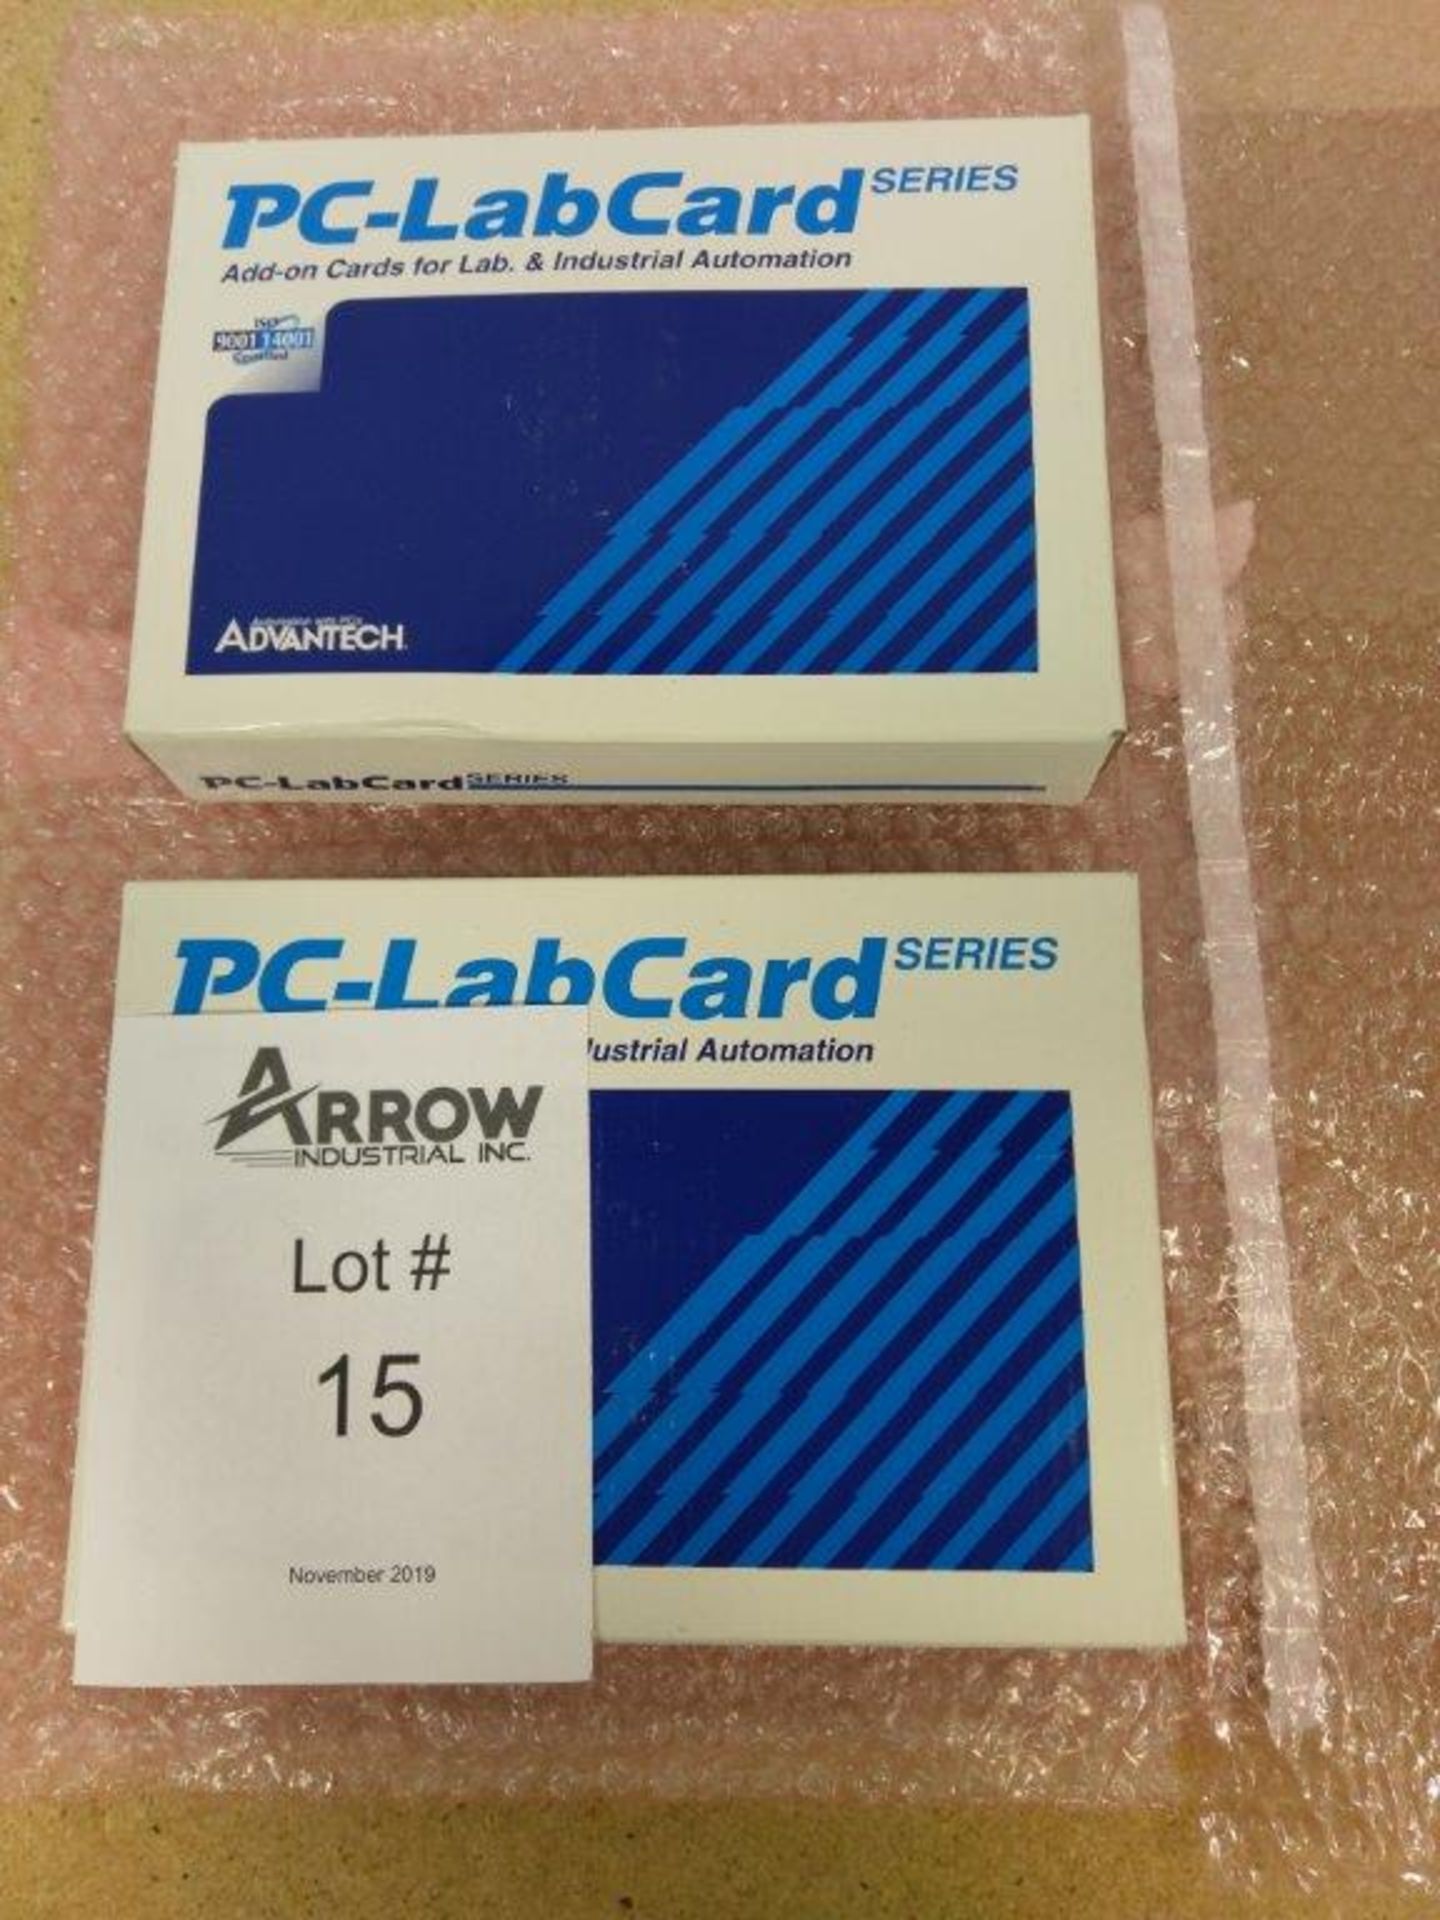 Lot of 2 LC-LabCard Series Add-On Cards Model PCLD-780 Wiring Terminal Board - (1) New Sealed